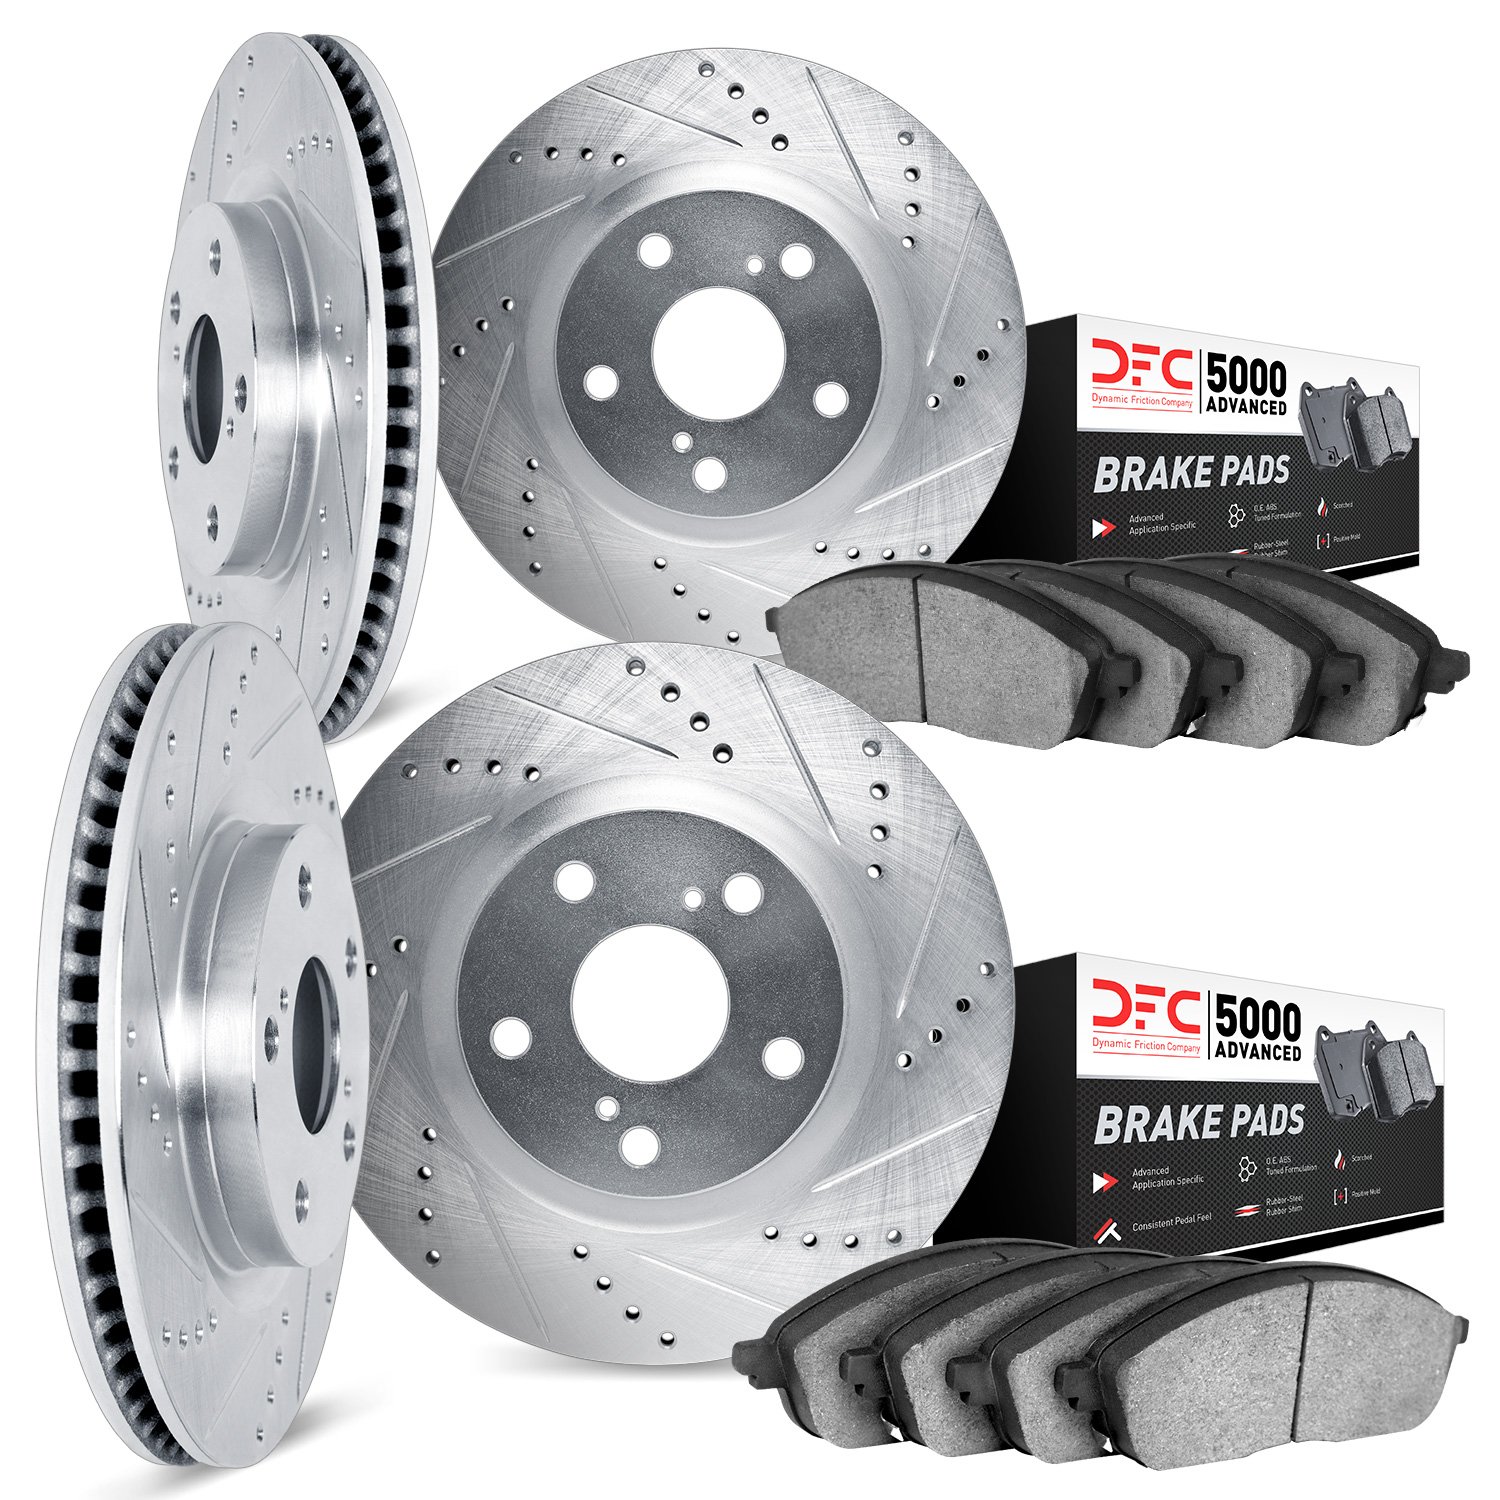 7504-80045 Drilled/Slotted Brake Rotors w/5000 Advanced Brake Pads Kit [Silver], 2004-2006 Ford/Lincoln/Mercury/Mazda, Position: